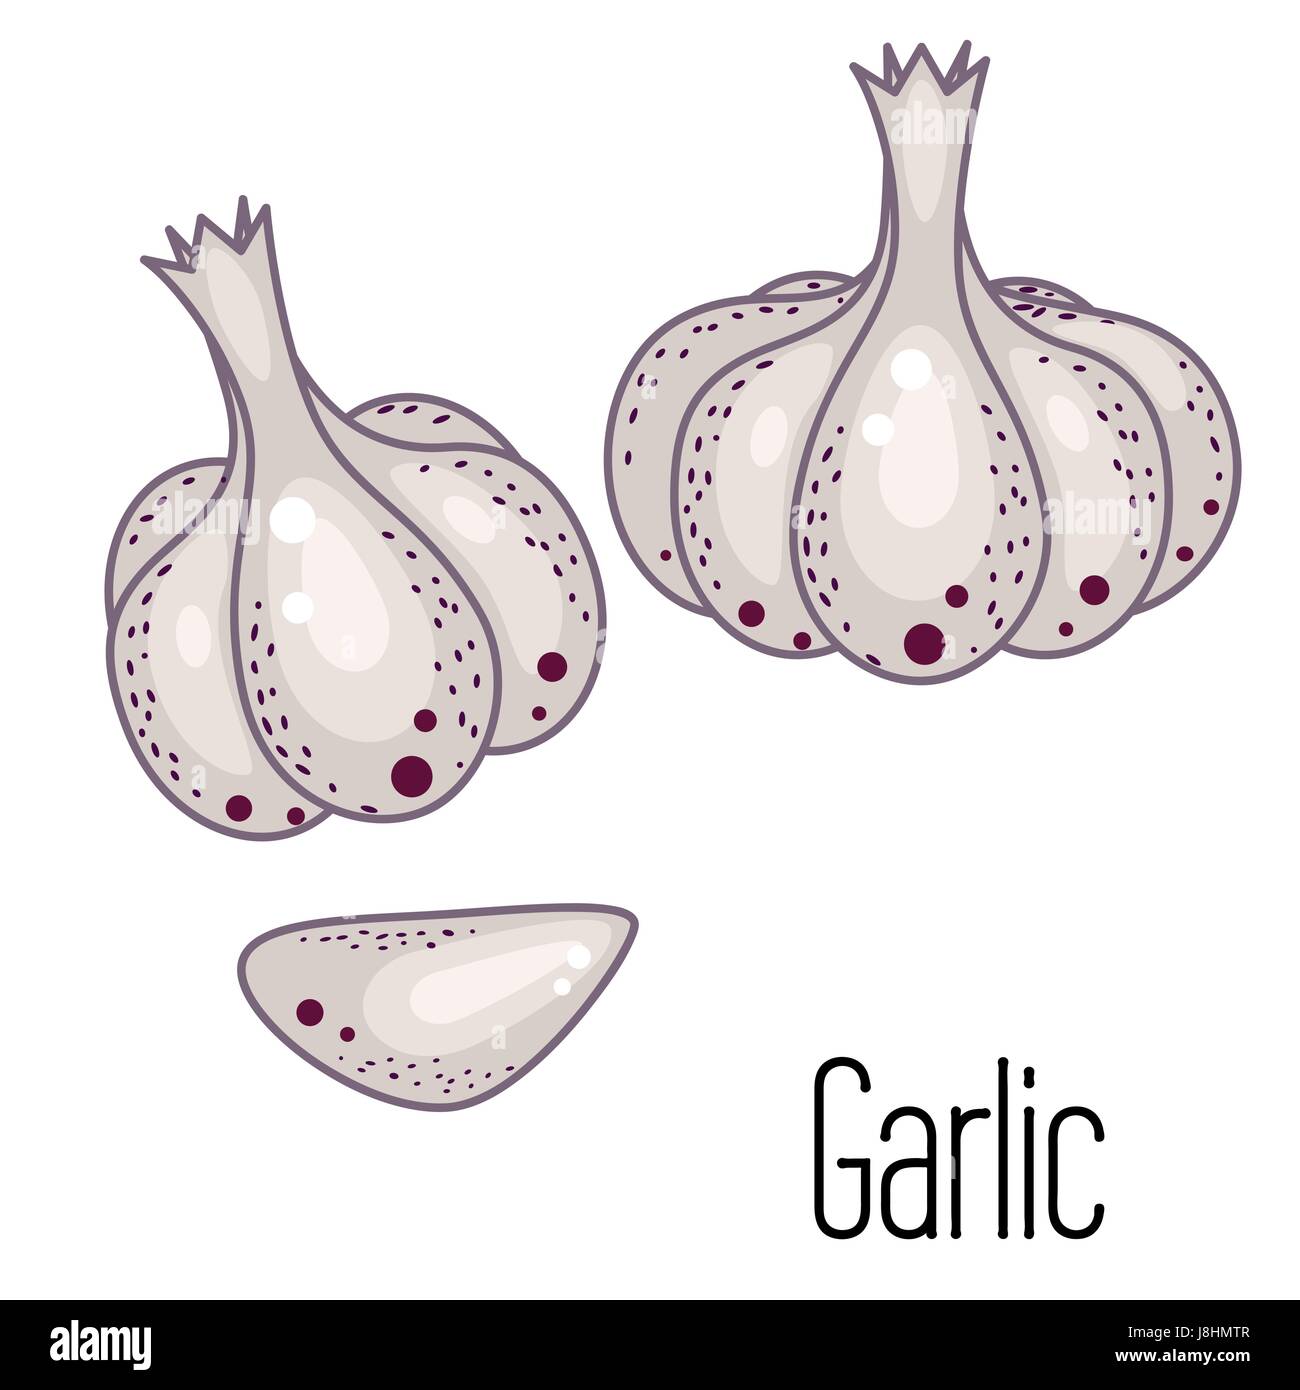 Garlic vector illustration. Garlic clove and bulb condiment icons on white. Stock Vector